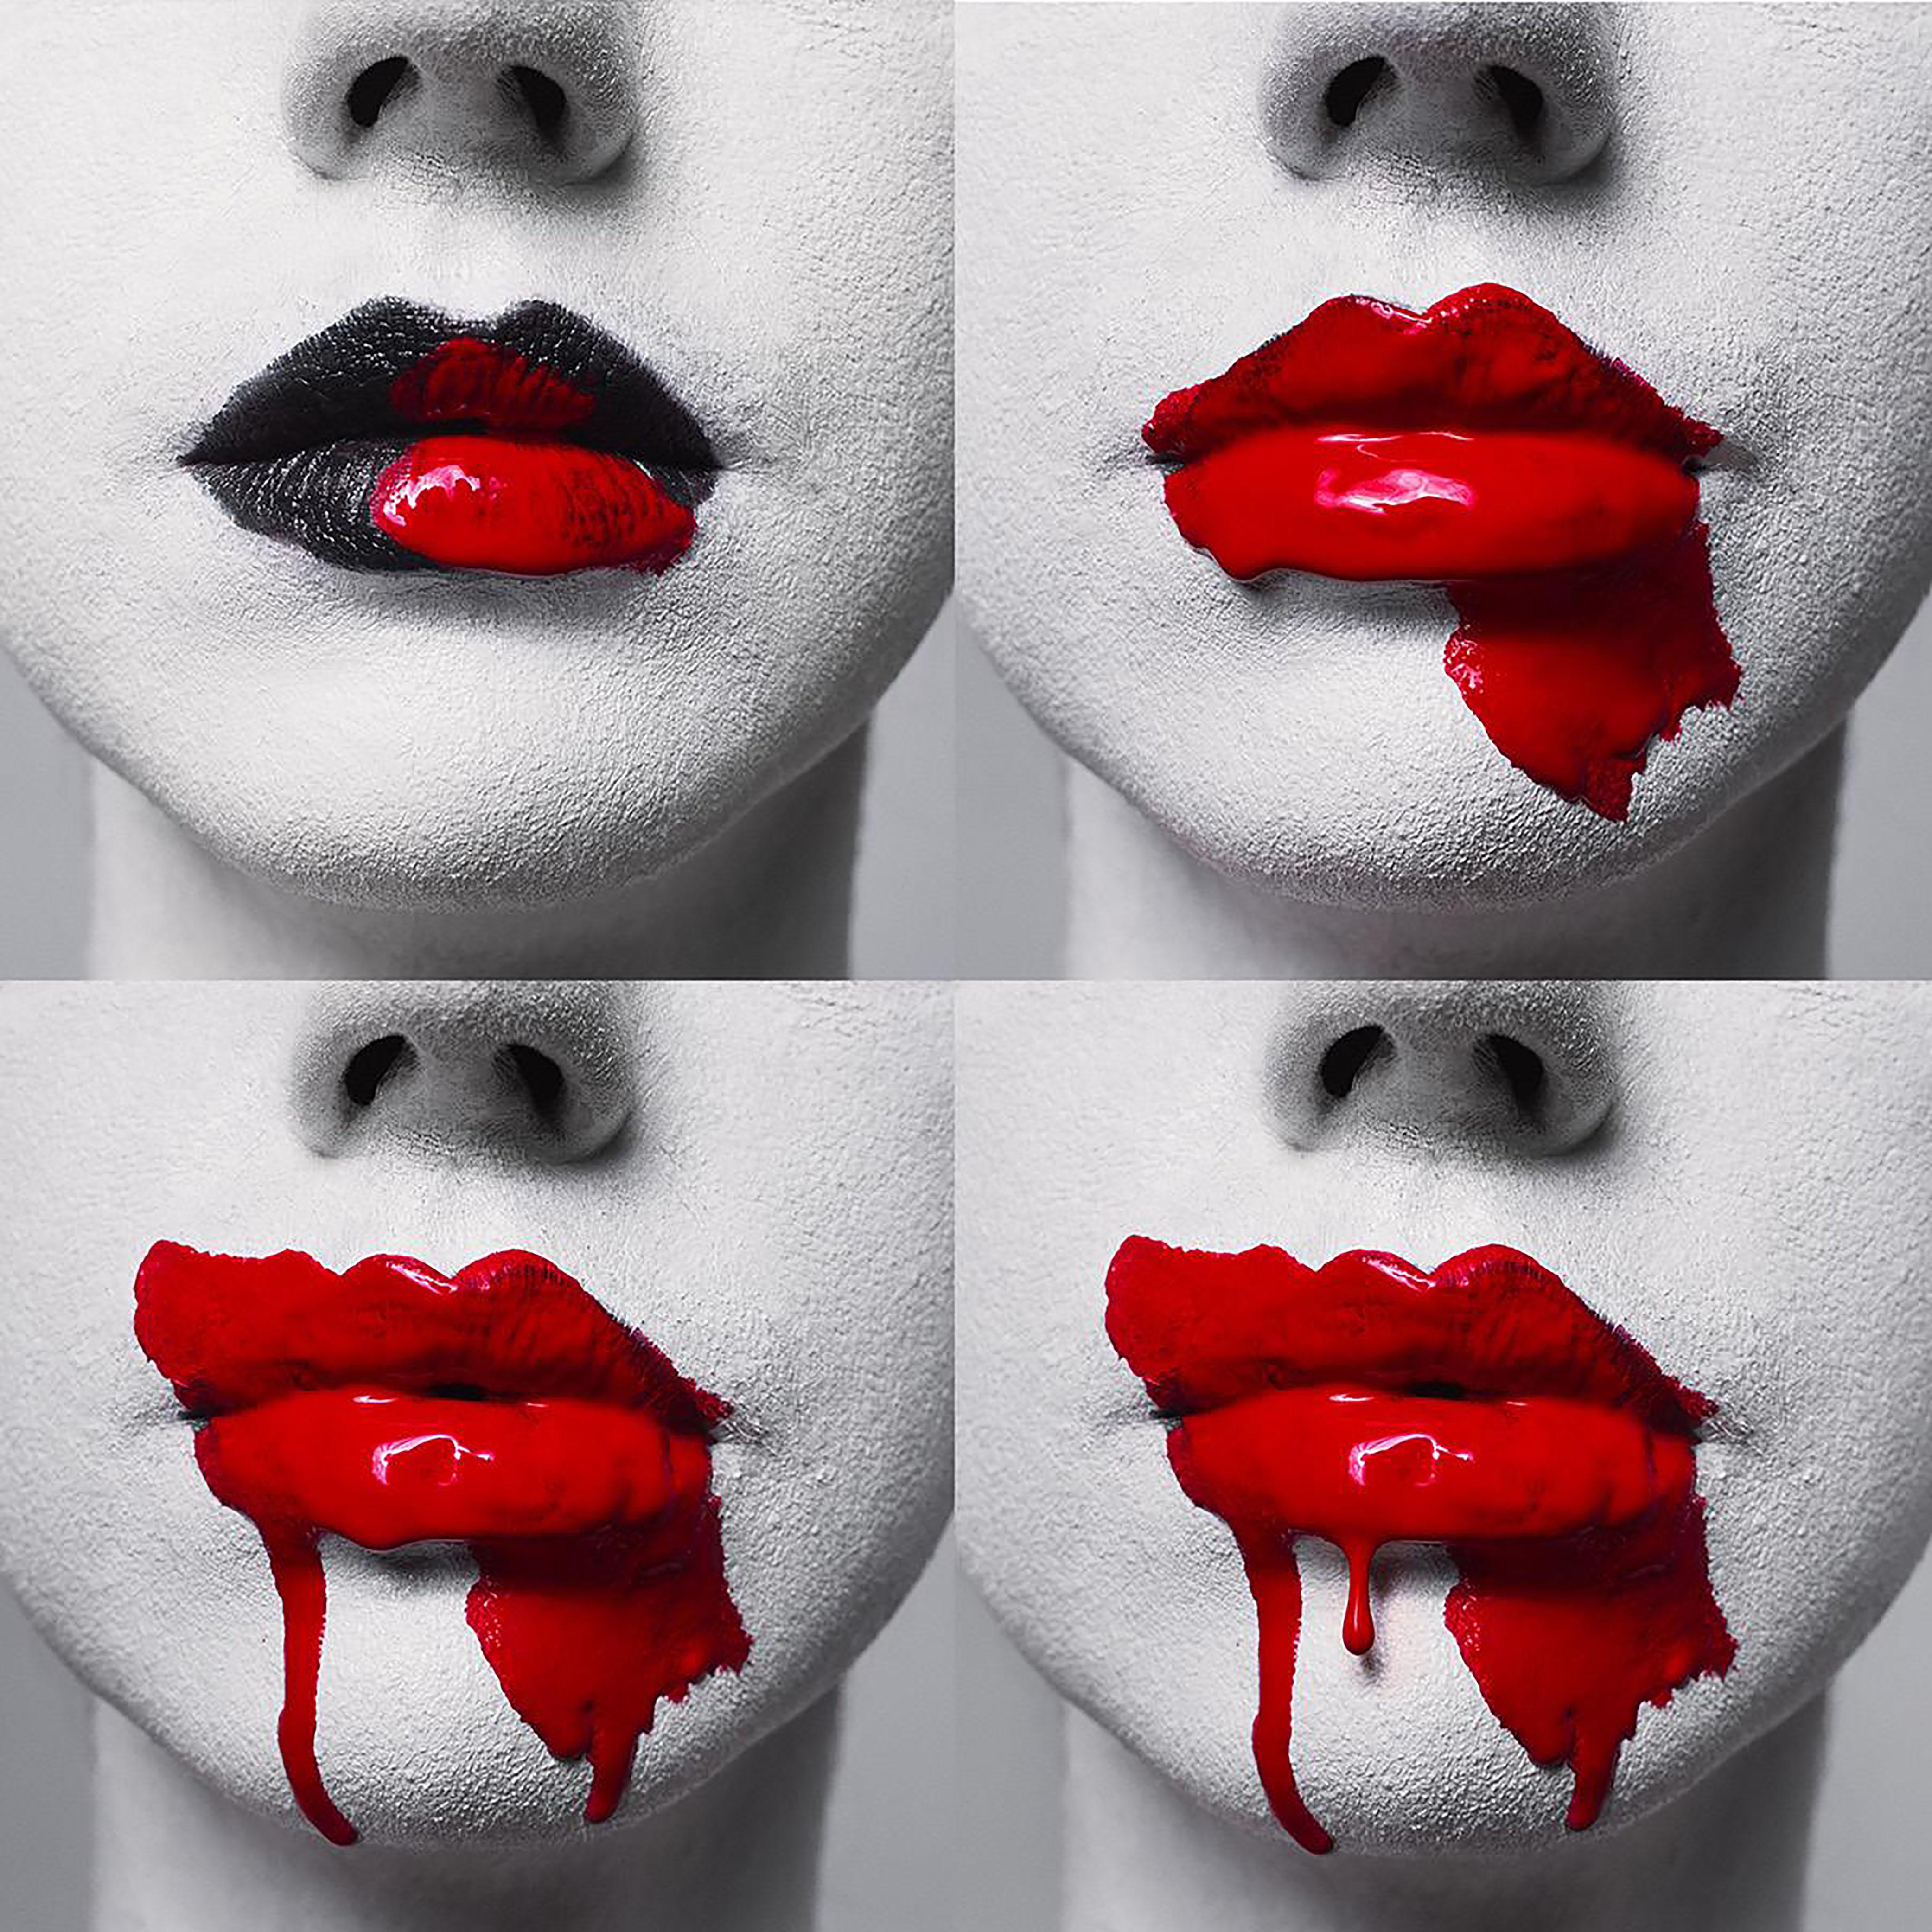 Tyler Shields, '4 Lips', 2019
Medium: C-type Photographic Print
Signature: Signed Certificate of Authenticity
Edition of 3
Unframed
Contemporary Art Photography
To the trade pricing

Art Info calls Tyler Shields “Hollywood’s Hottest and Most Twisted